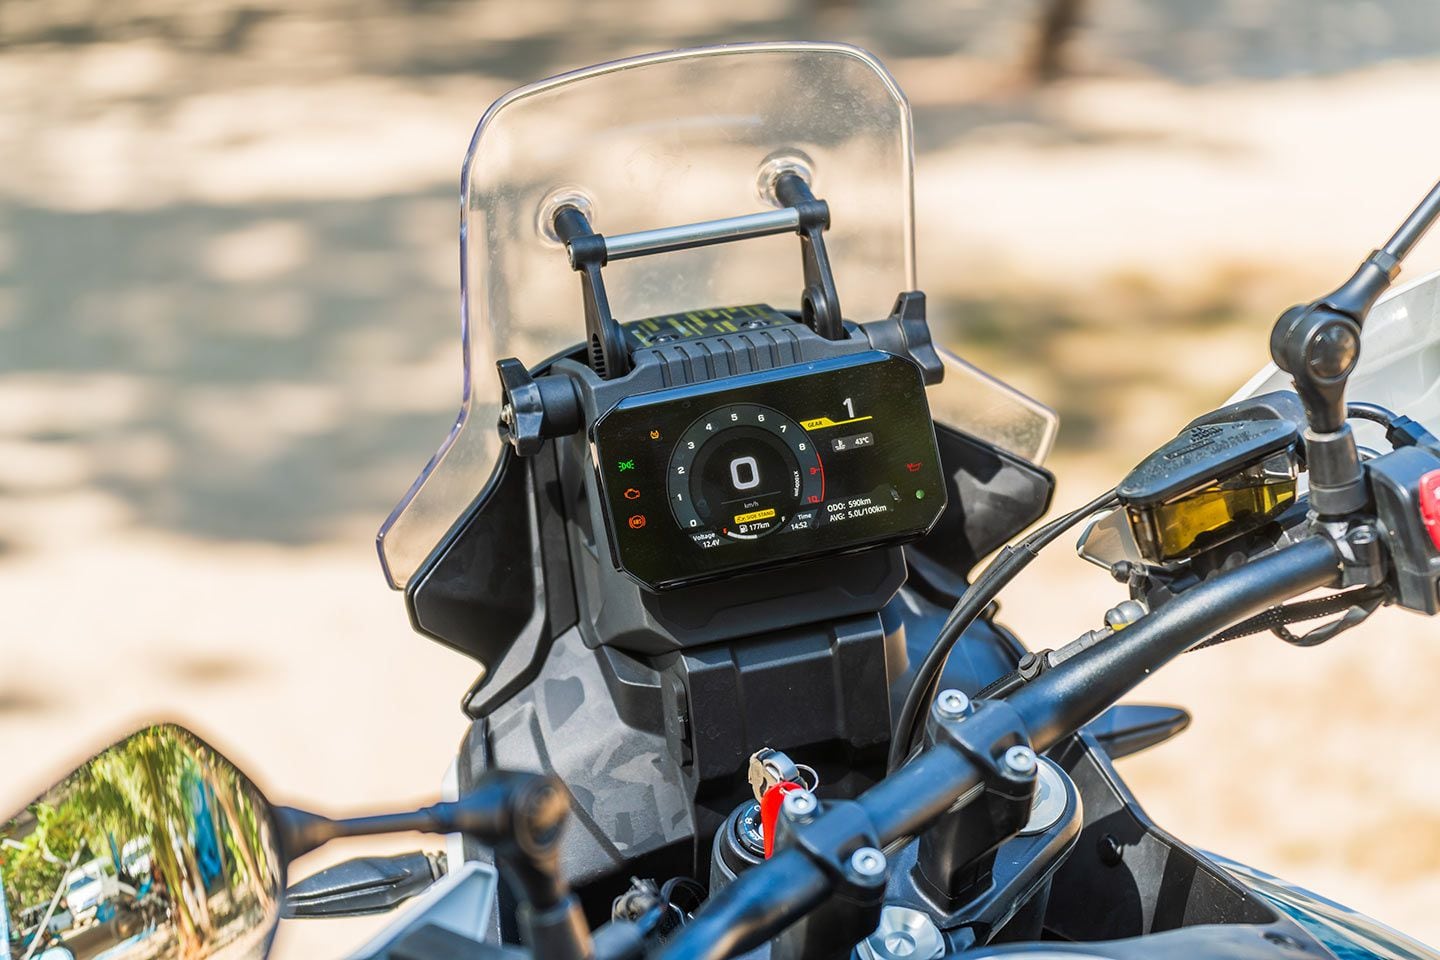 Things you did not used to expect on a $6,500 motorcycle: a 5-inch TFT, toolless adjustable windscreen, and USB connector.